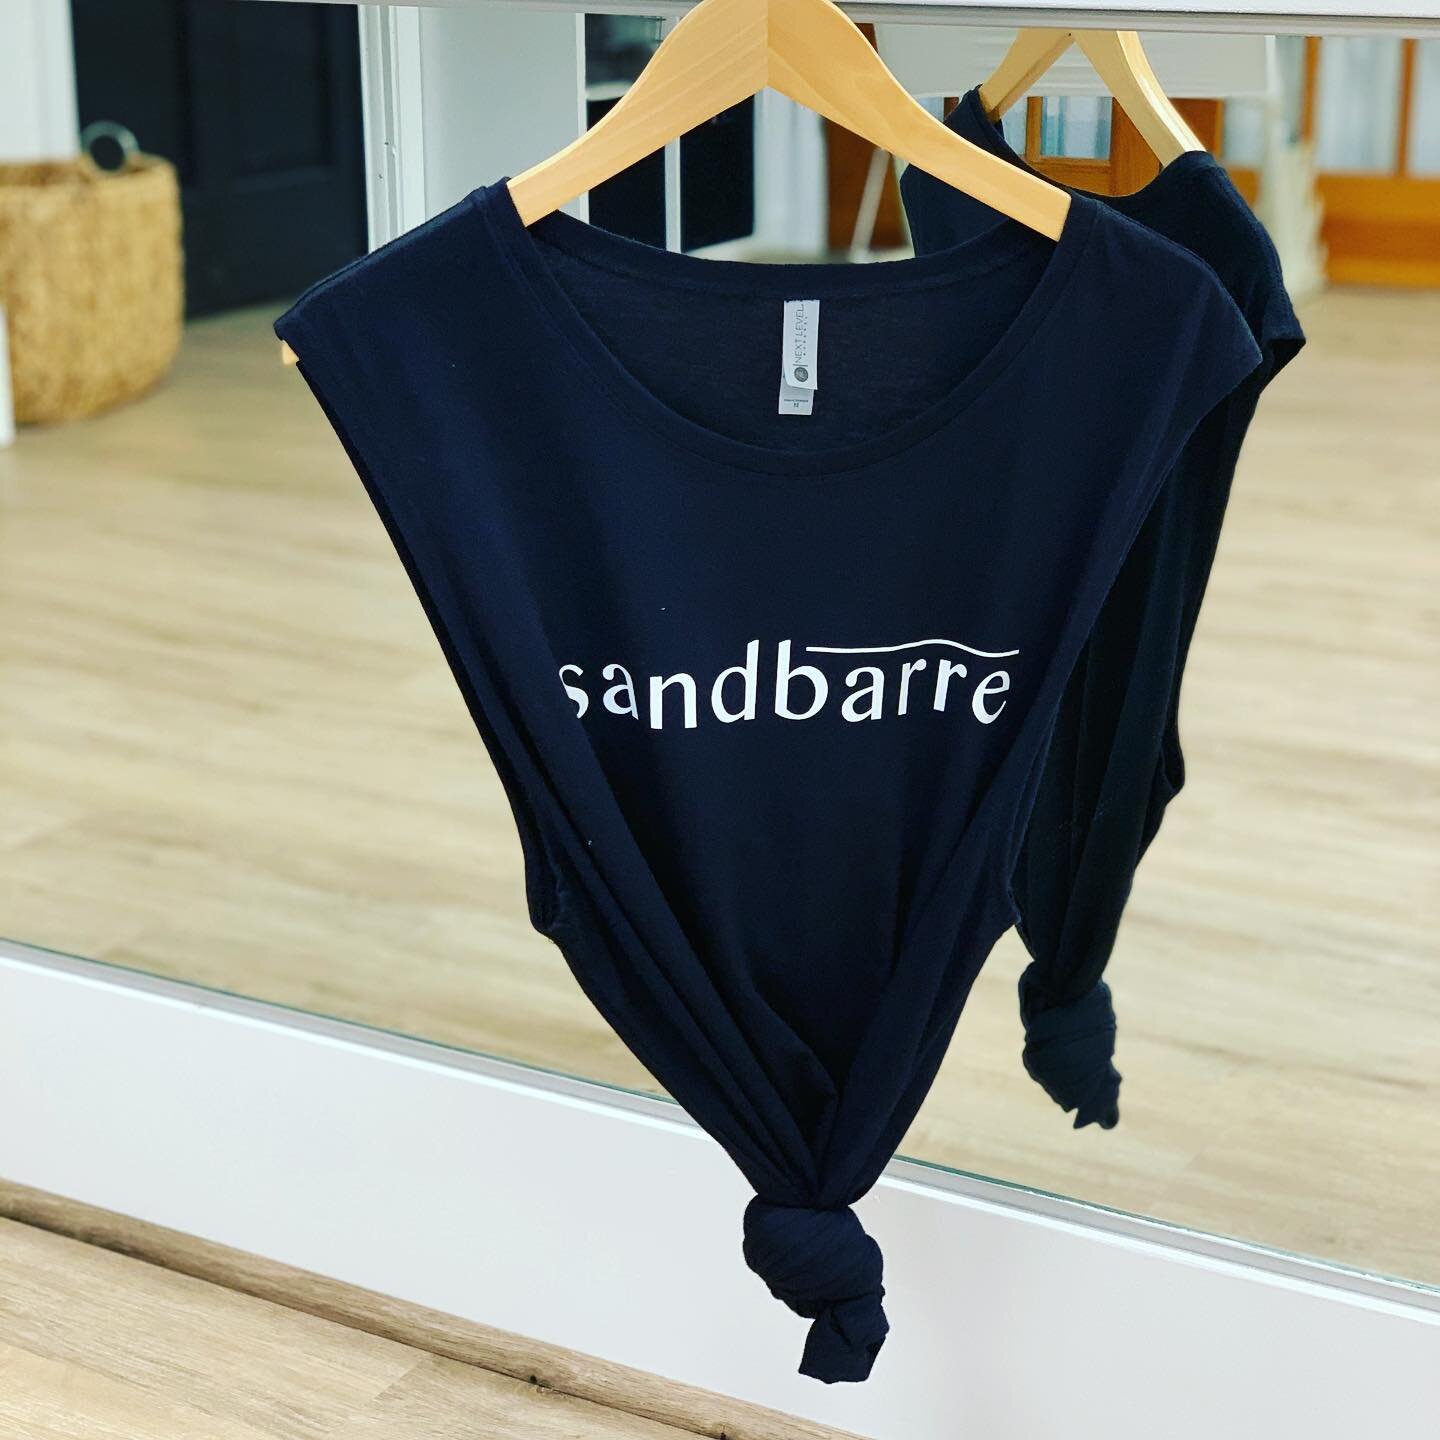 We&rsquo;re loving seeing you all in your gear! Don&rsquo;t forget to tag us in it! #sandbarre #marshfield #barre #southshoreliving #fitness